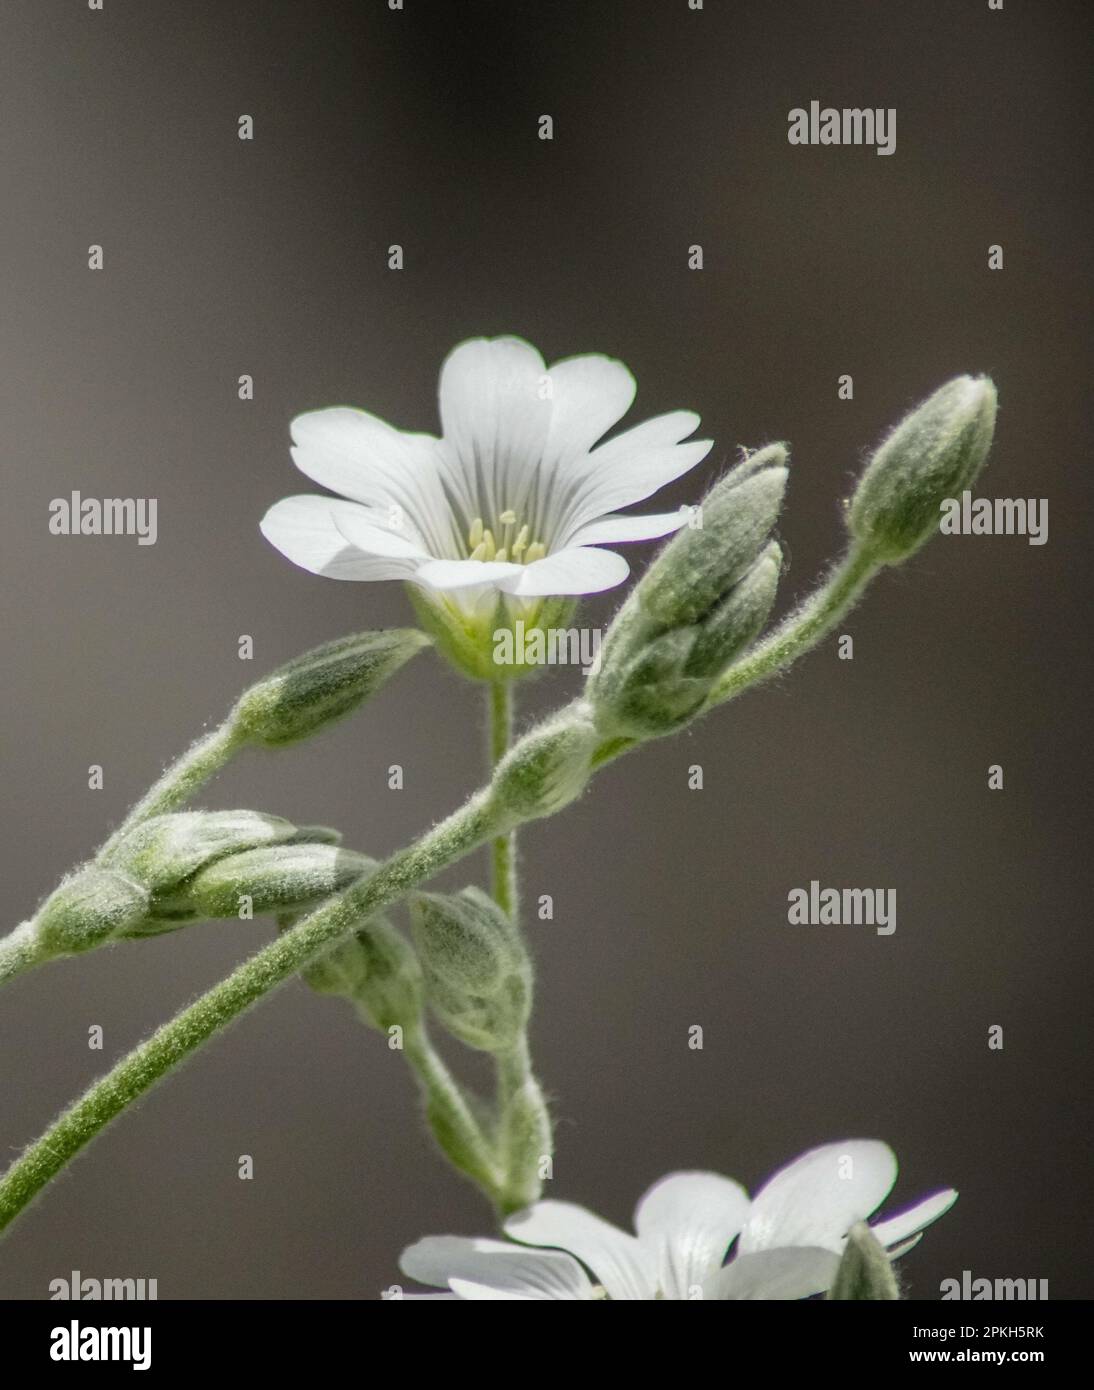 Close-up of white flowering plant against blurred background Stock Photo